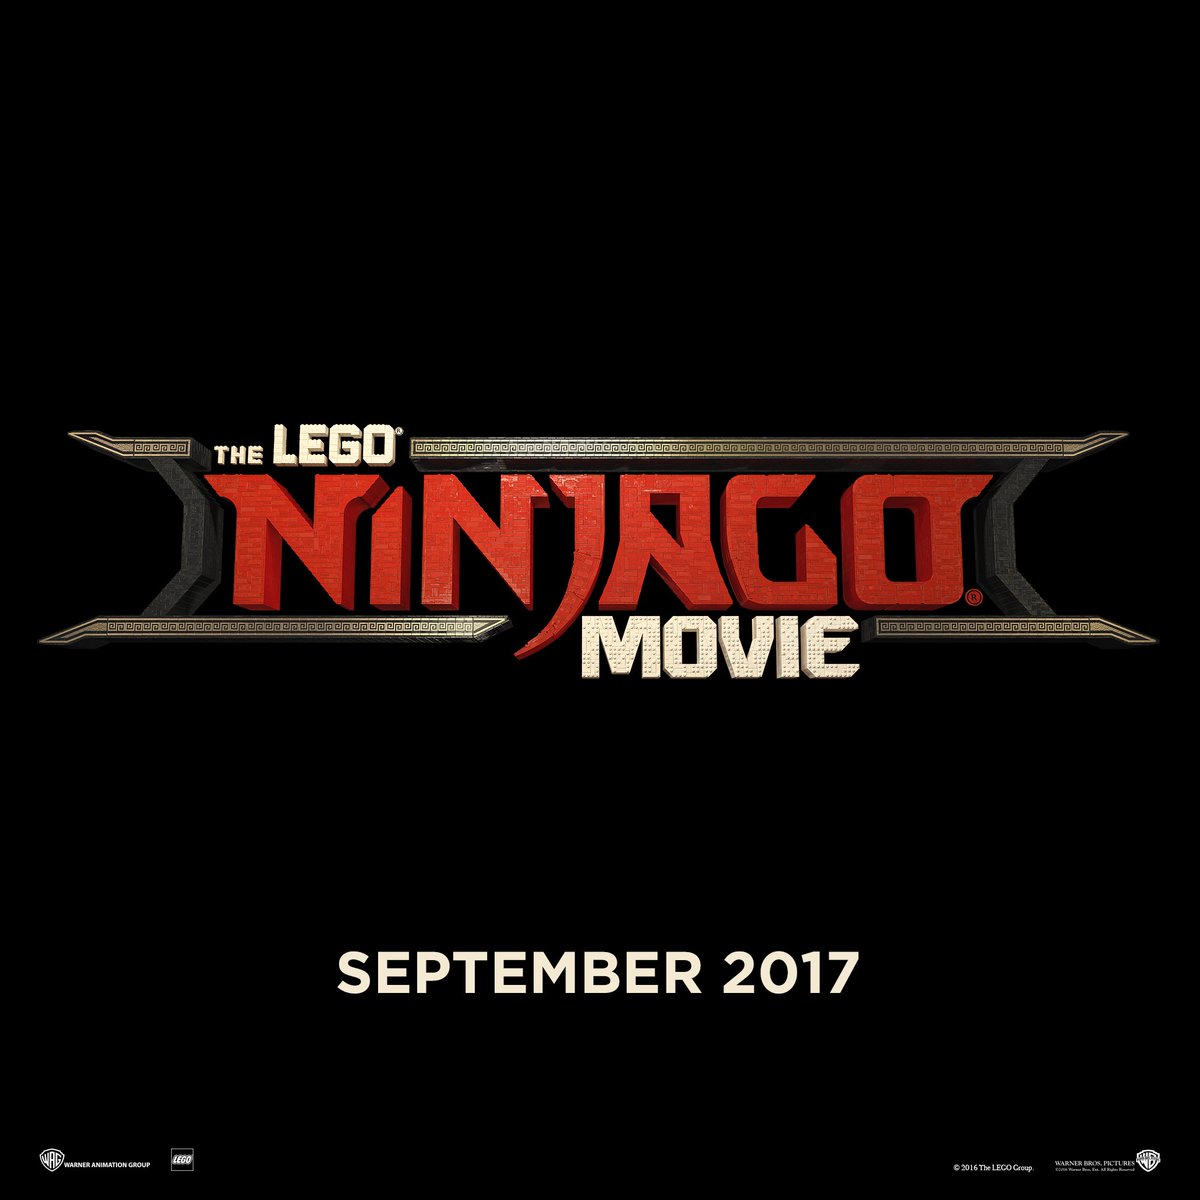 RT @LEGO_Group: The stars have been assembled for the LEGO NINJAGO Movie! Debuting in theaters September 2017. #LEGONINJAGOMovie https://t.…